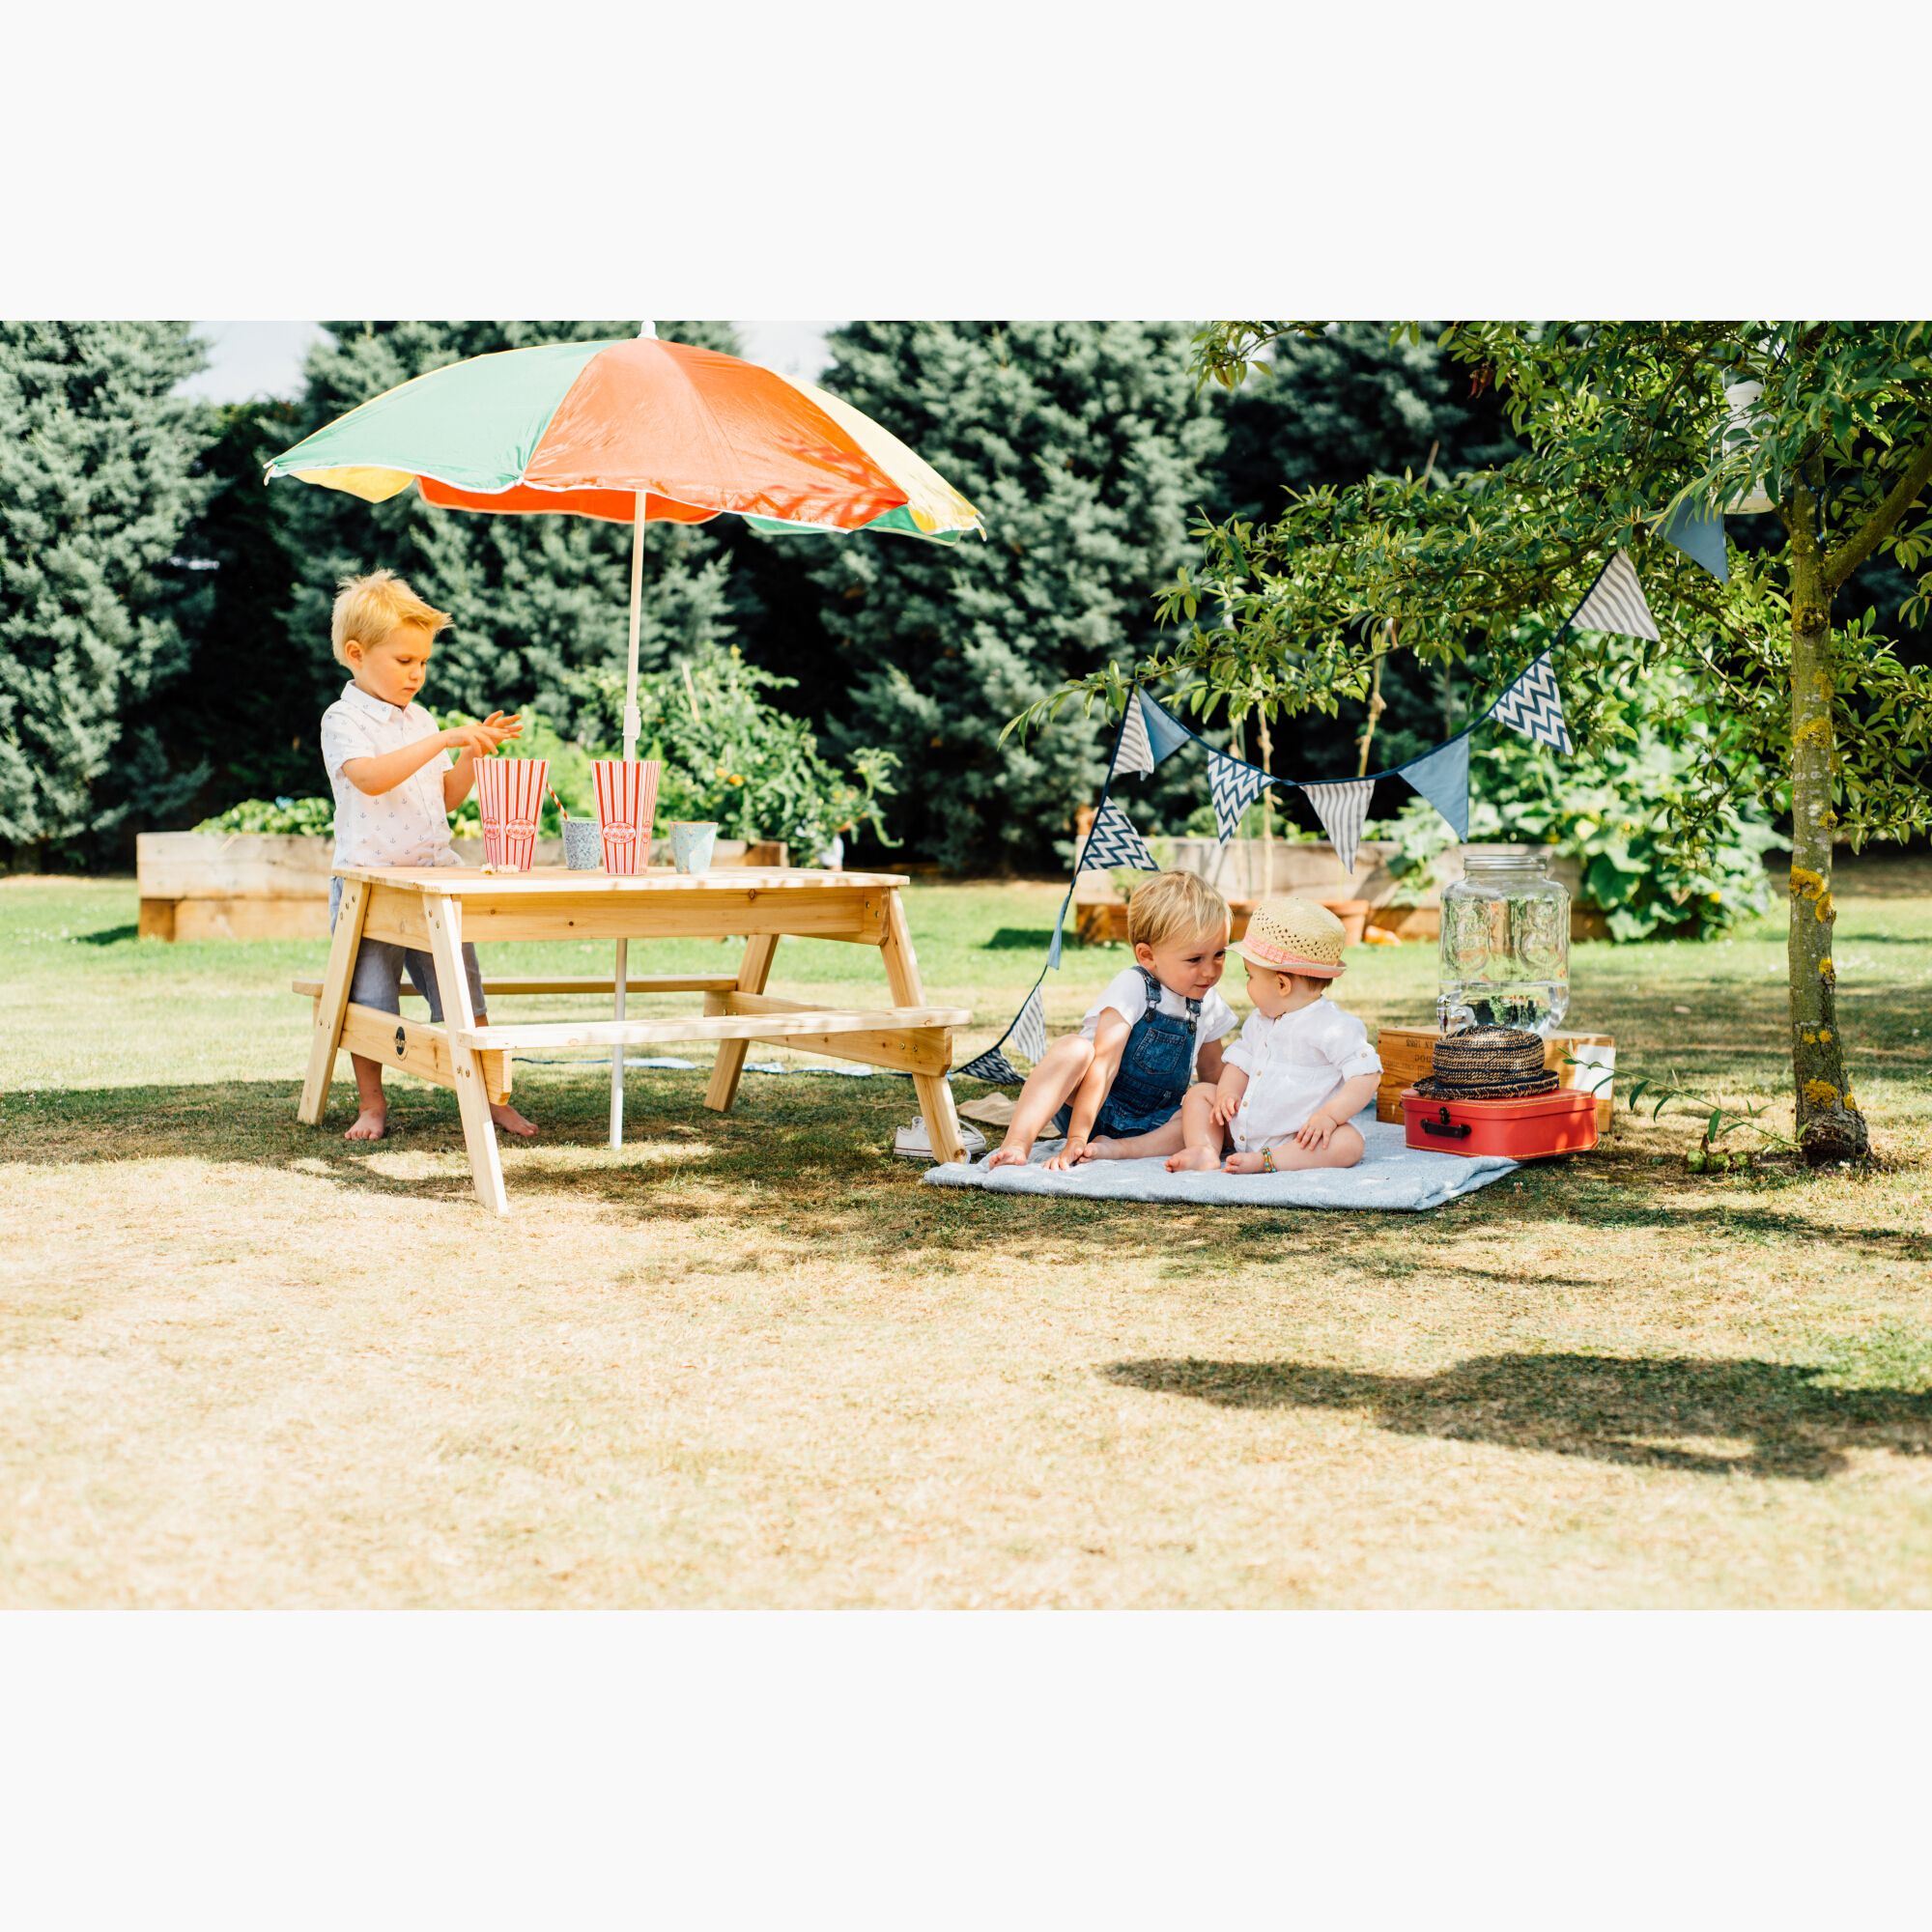 Plum Play Wooden Picnic Table with Parasol - image 2 of 6